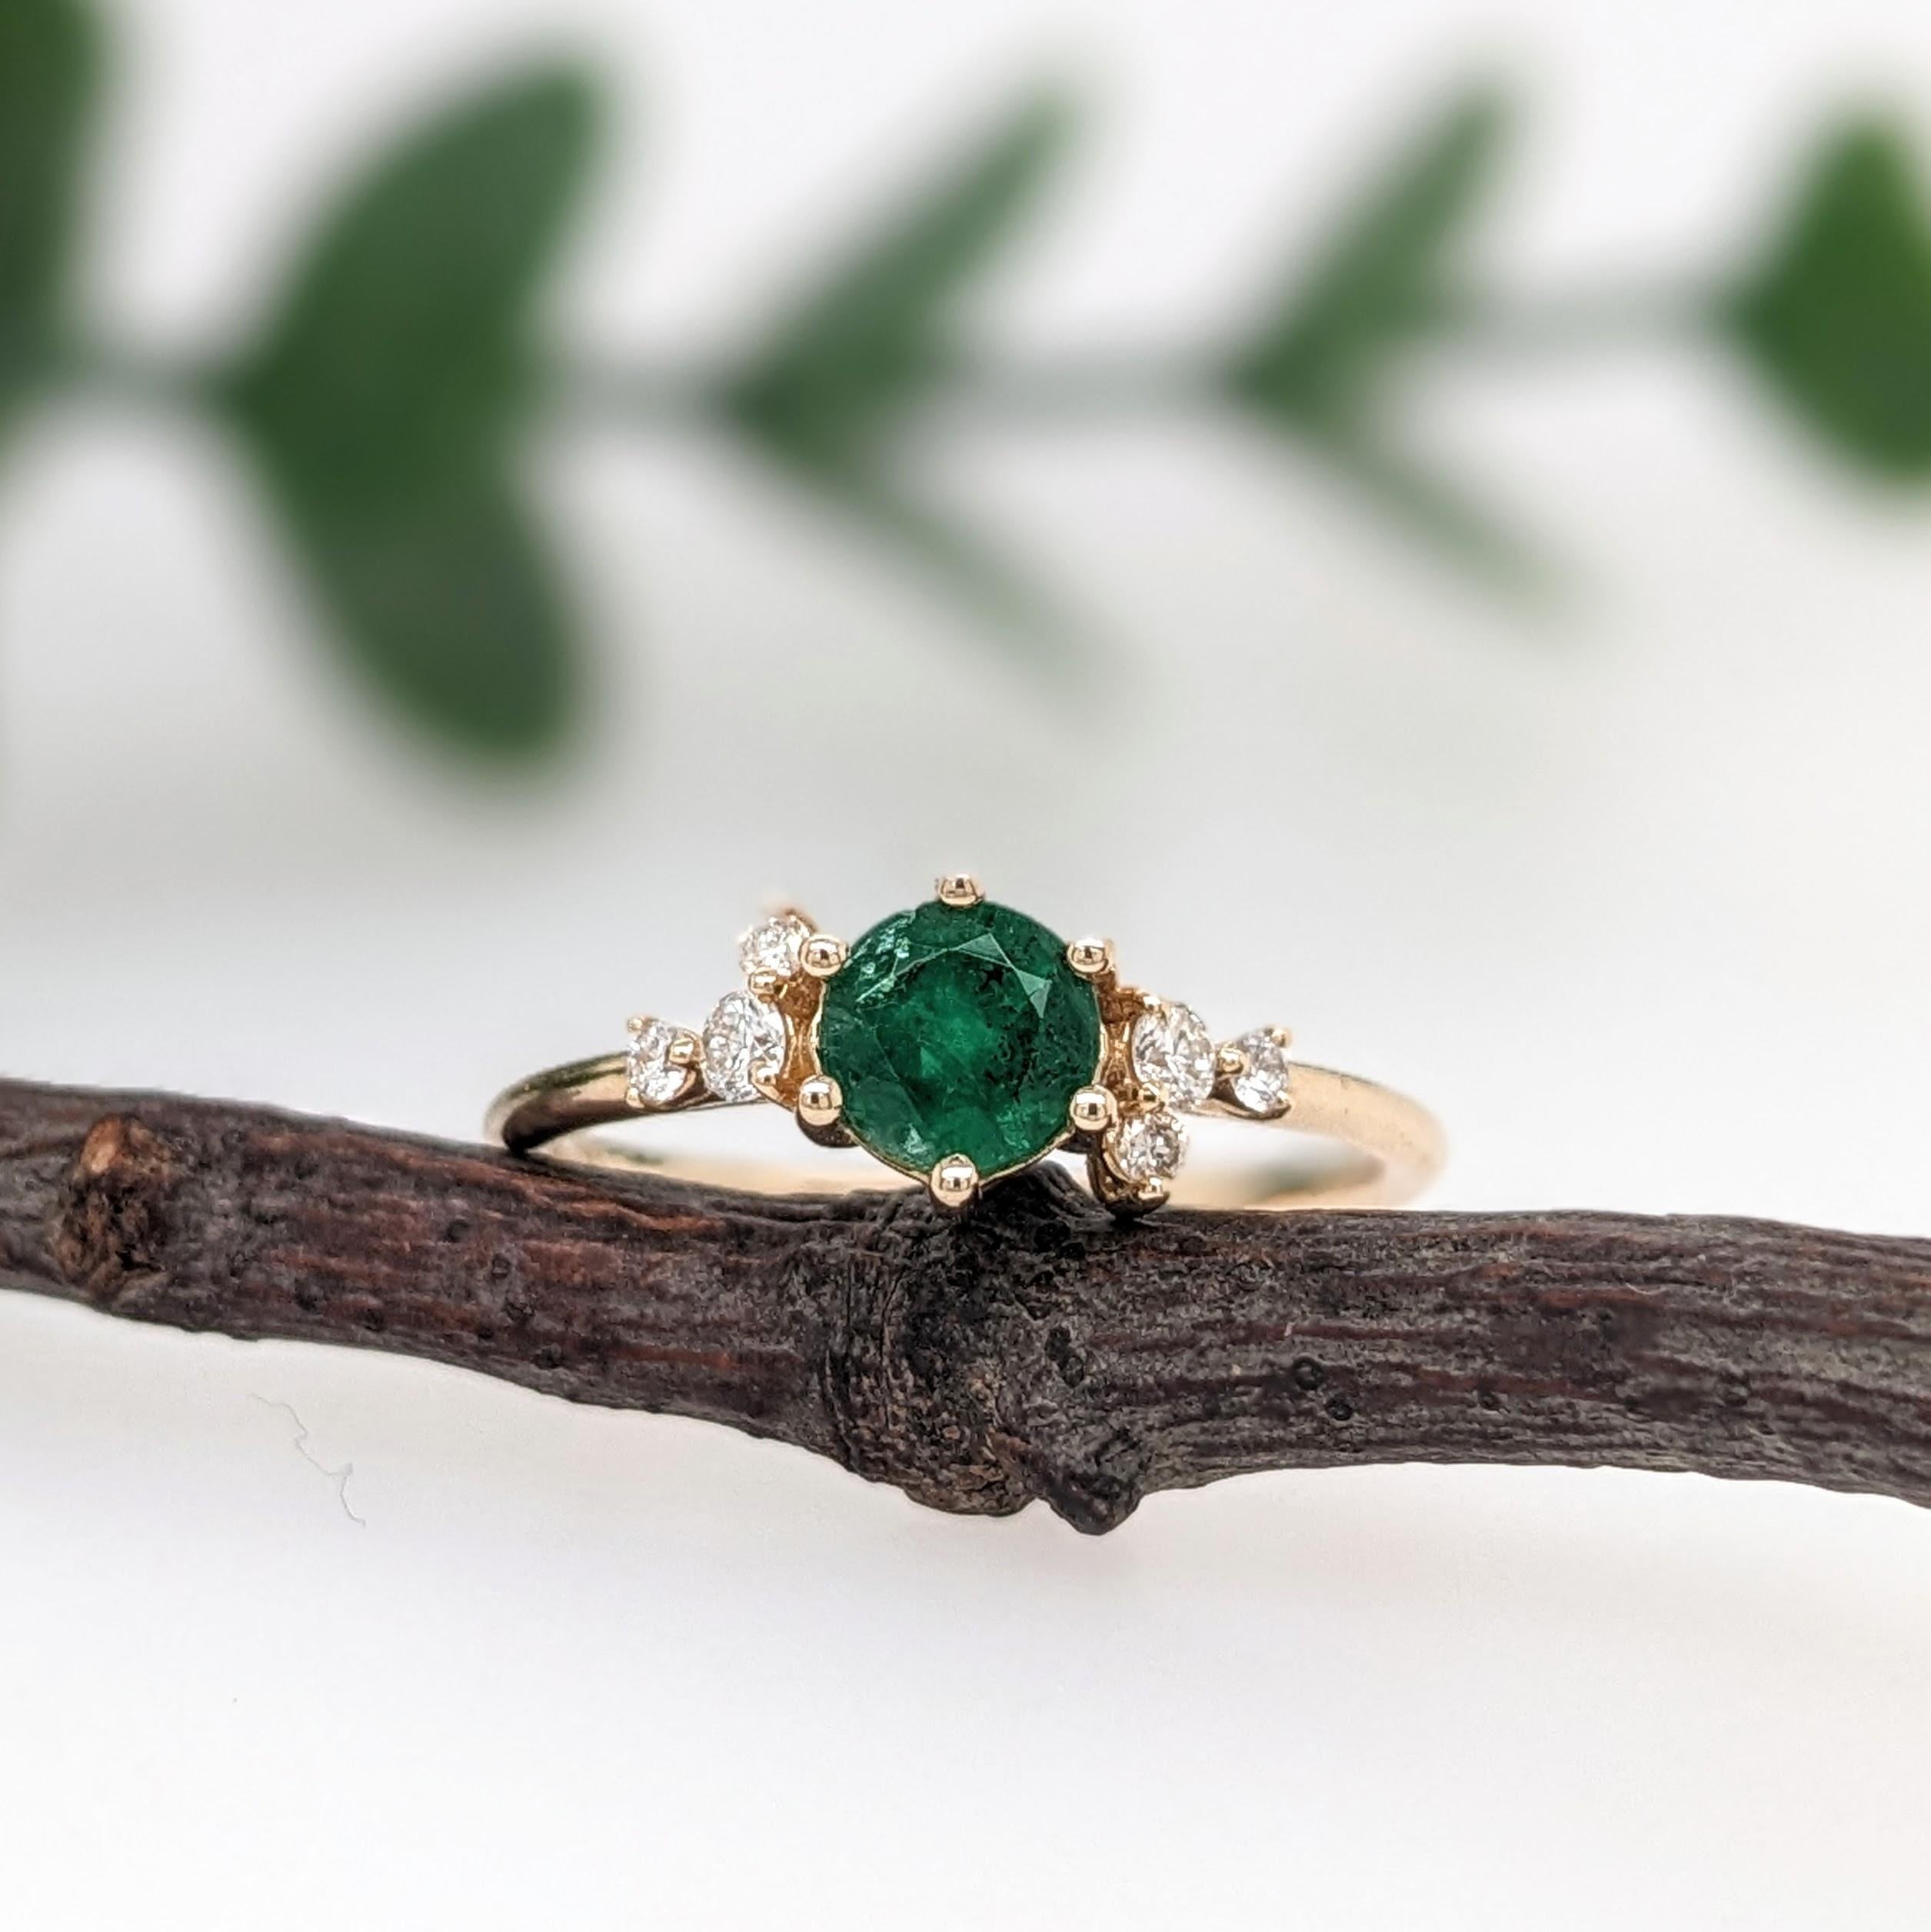 A simple dainty ring perfect for the minimalist in your life or for giving someone their first piece of jewelry :) This emerald presents a mixture of green hues which is perfectly accentuated by diamonds on each side. The slim yellow gold shank